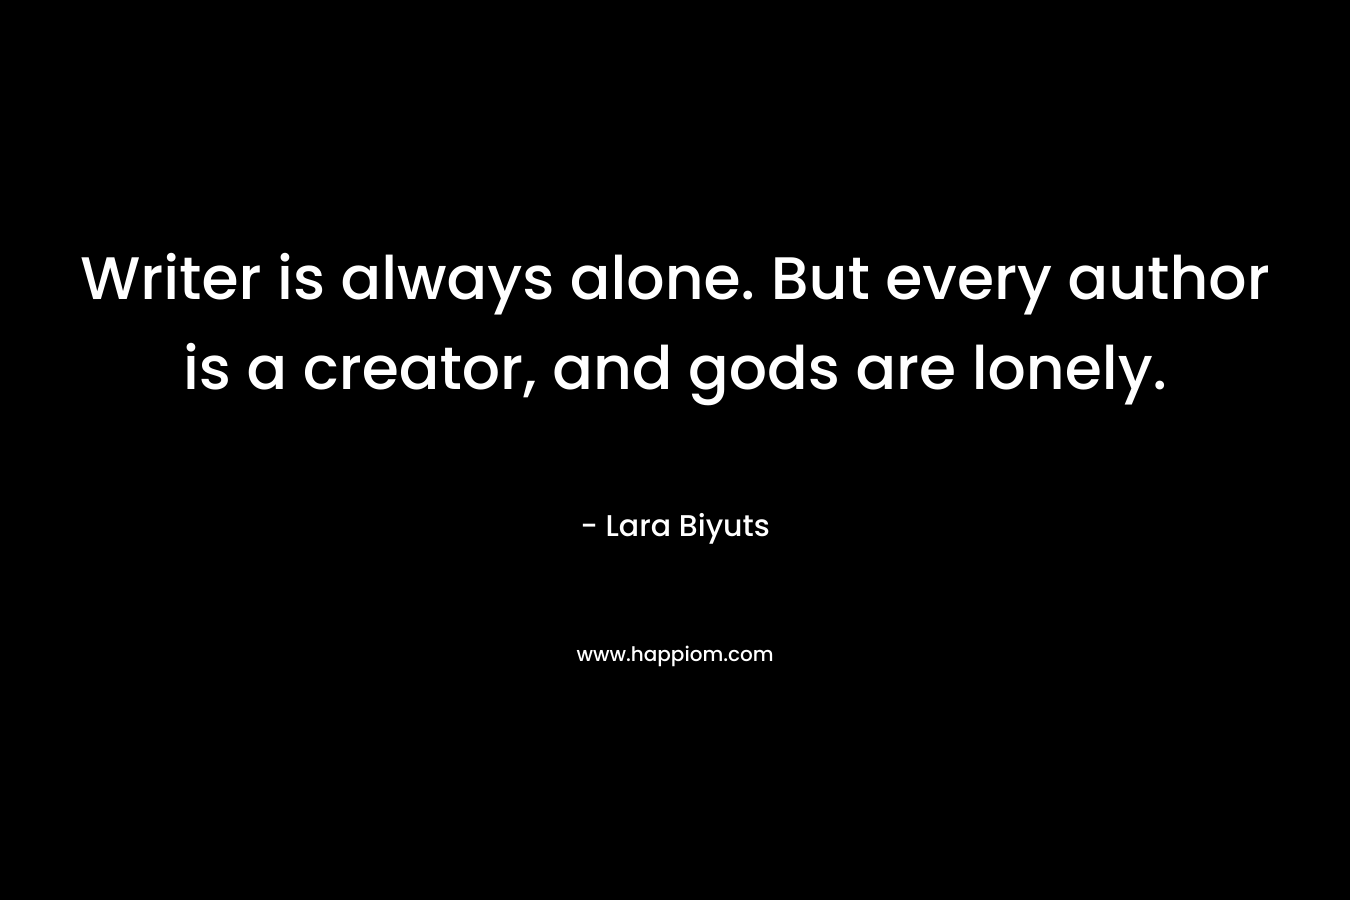 Writer is always alone. But every author is a creator, and gods are lonely.